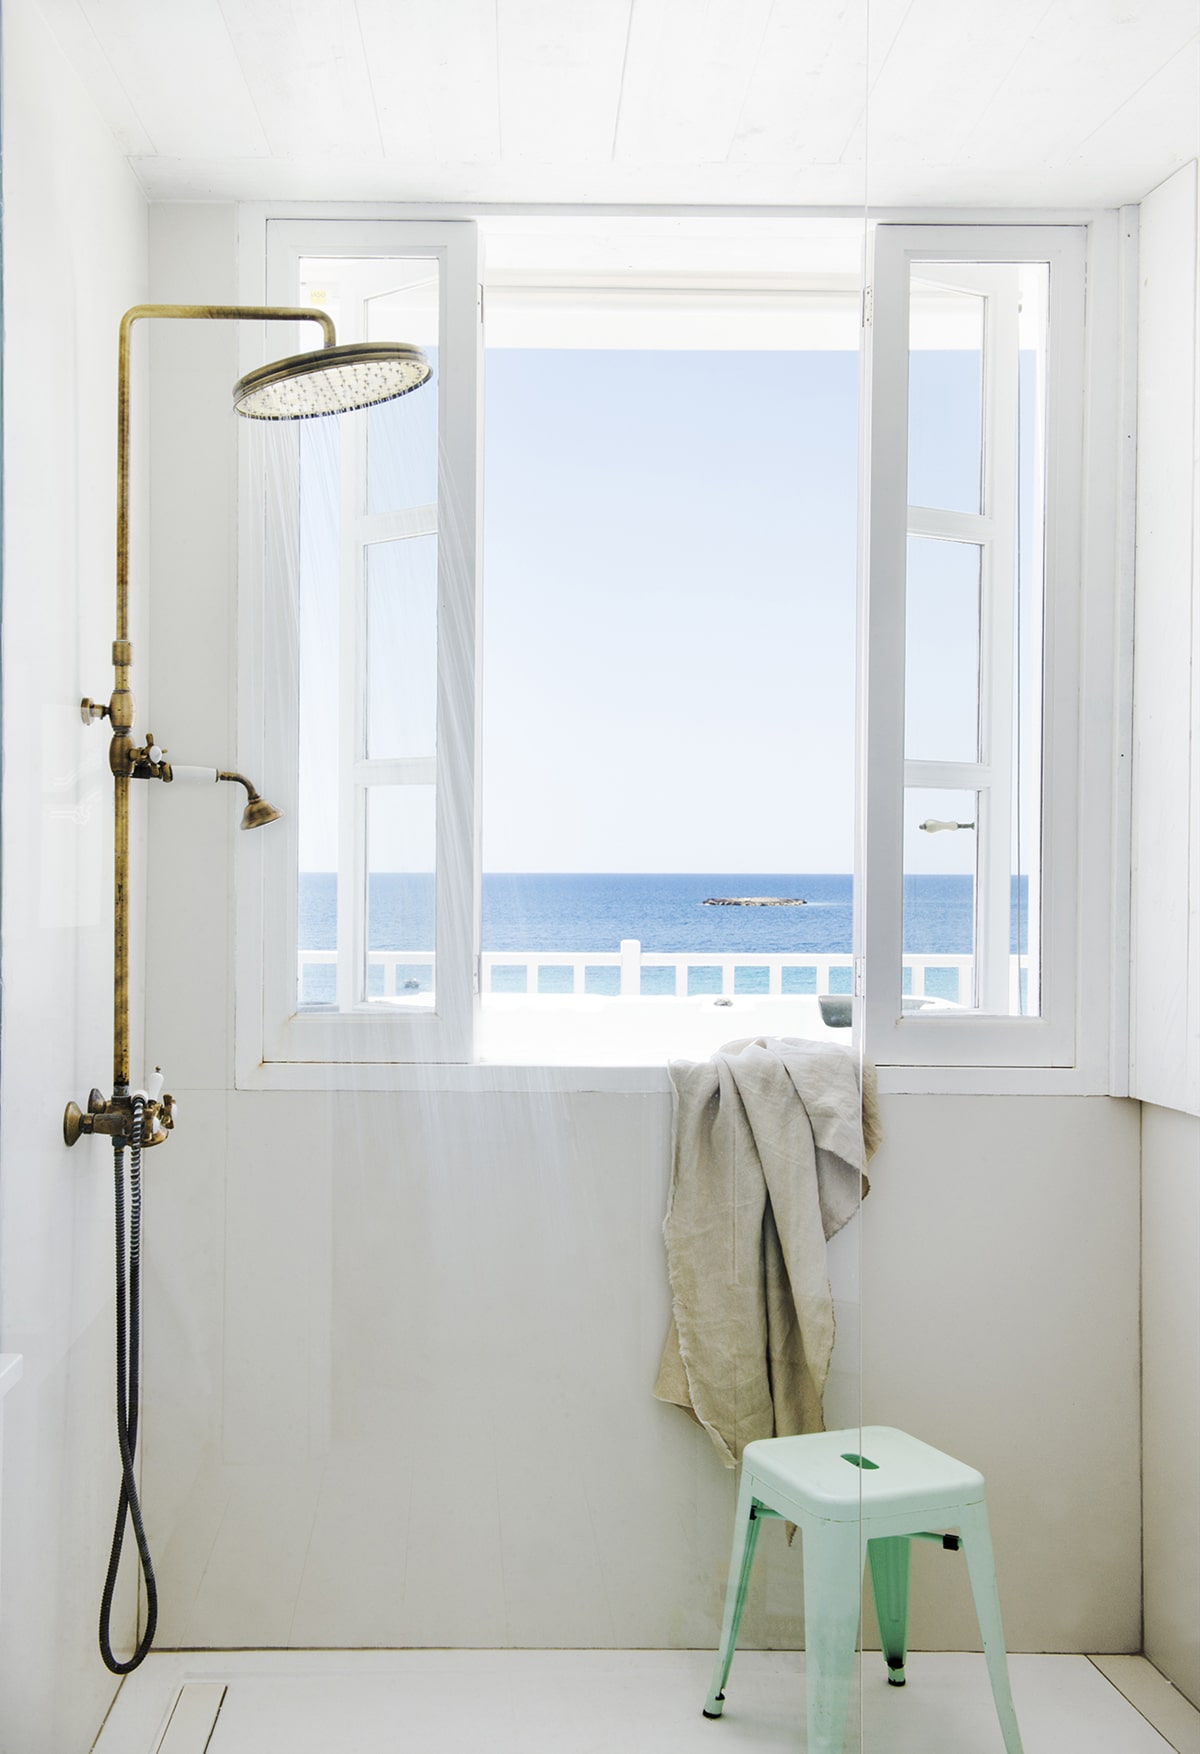 shower with a view of the sea | mallorca island house tour on coco kelleyshower with a view of the sea | mallorca island house tour on coco kelley